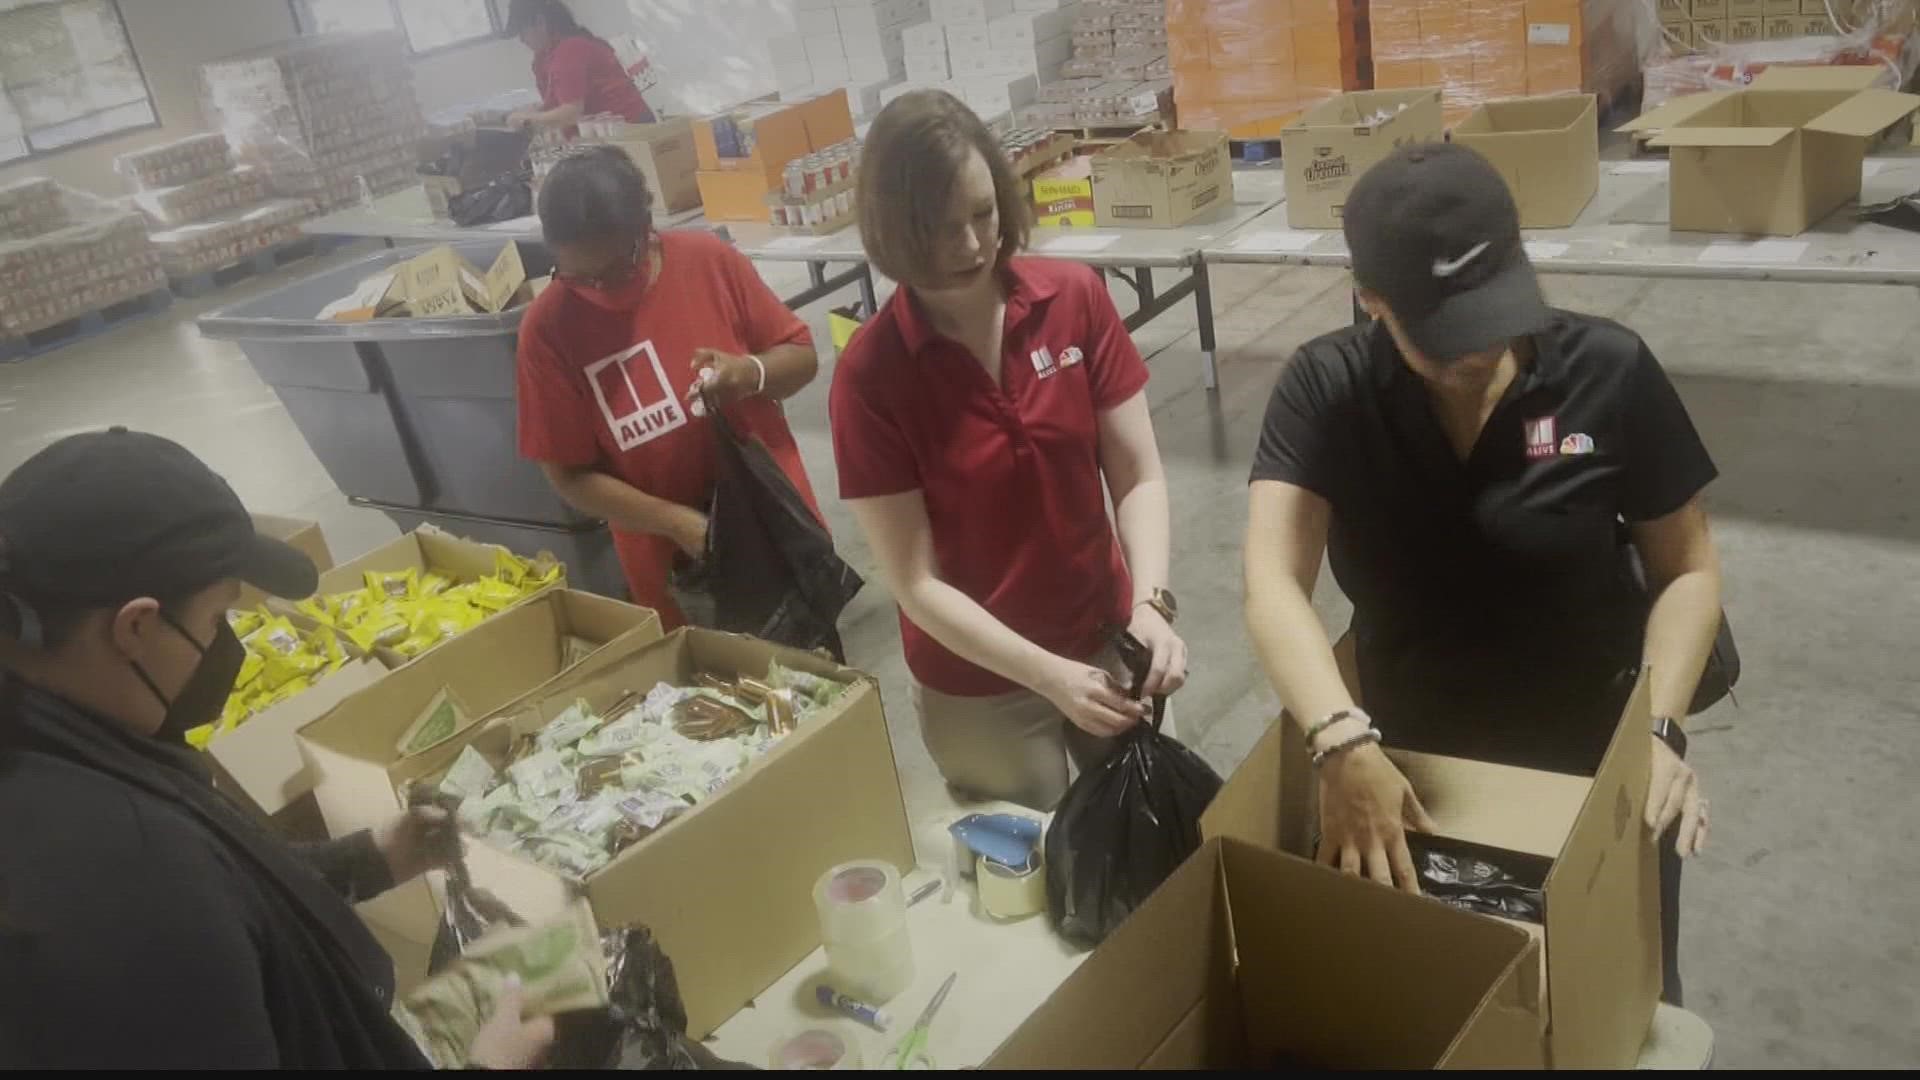 11Alive volunteers helped pack meals for students in the area.